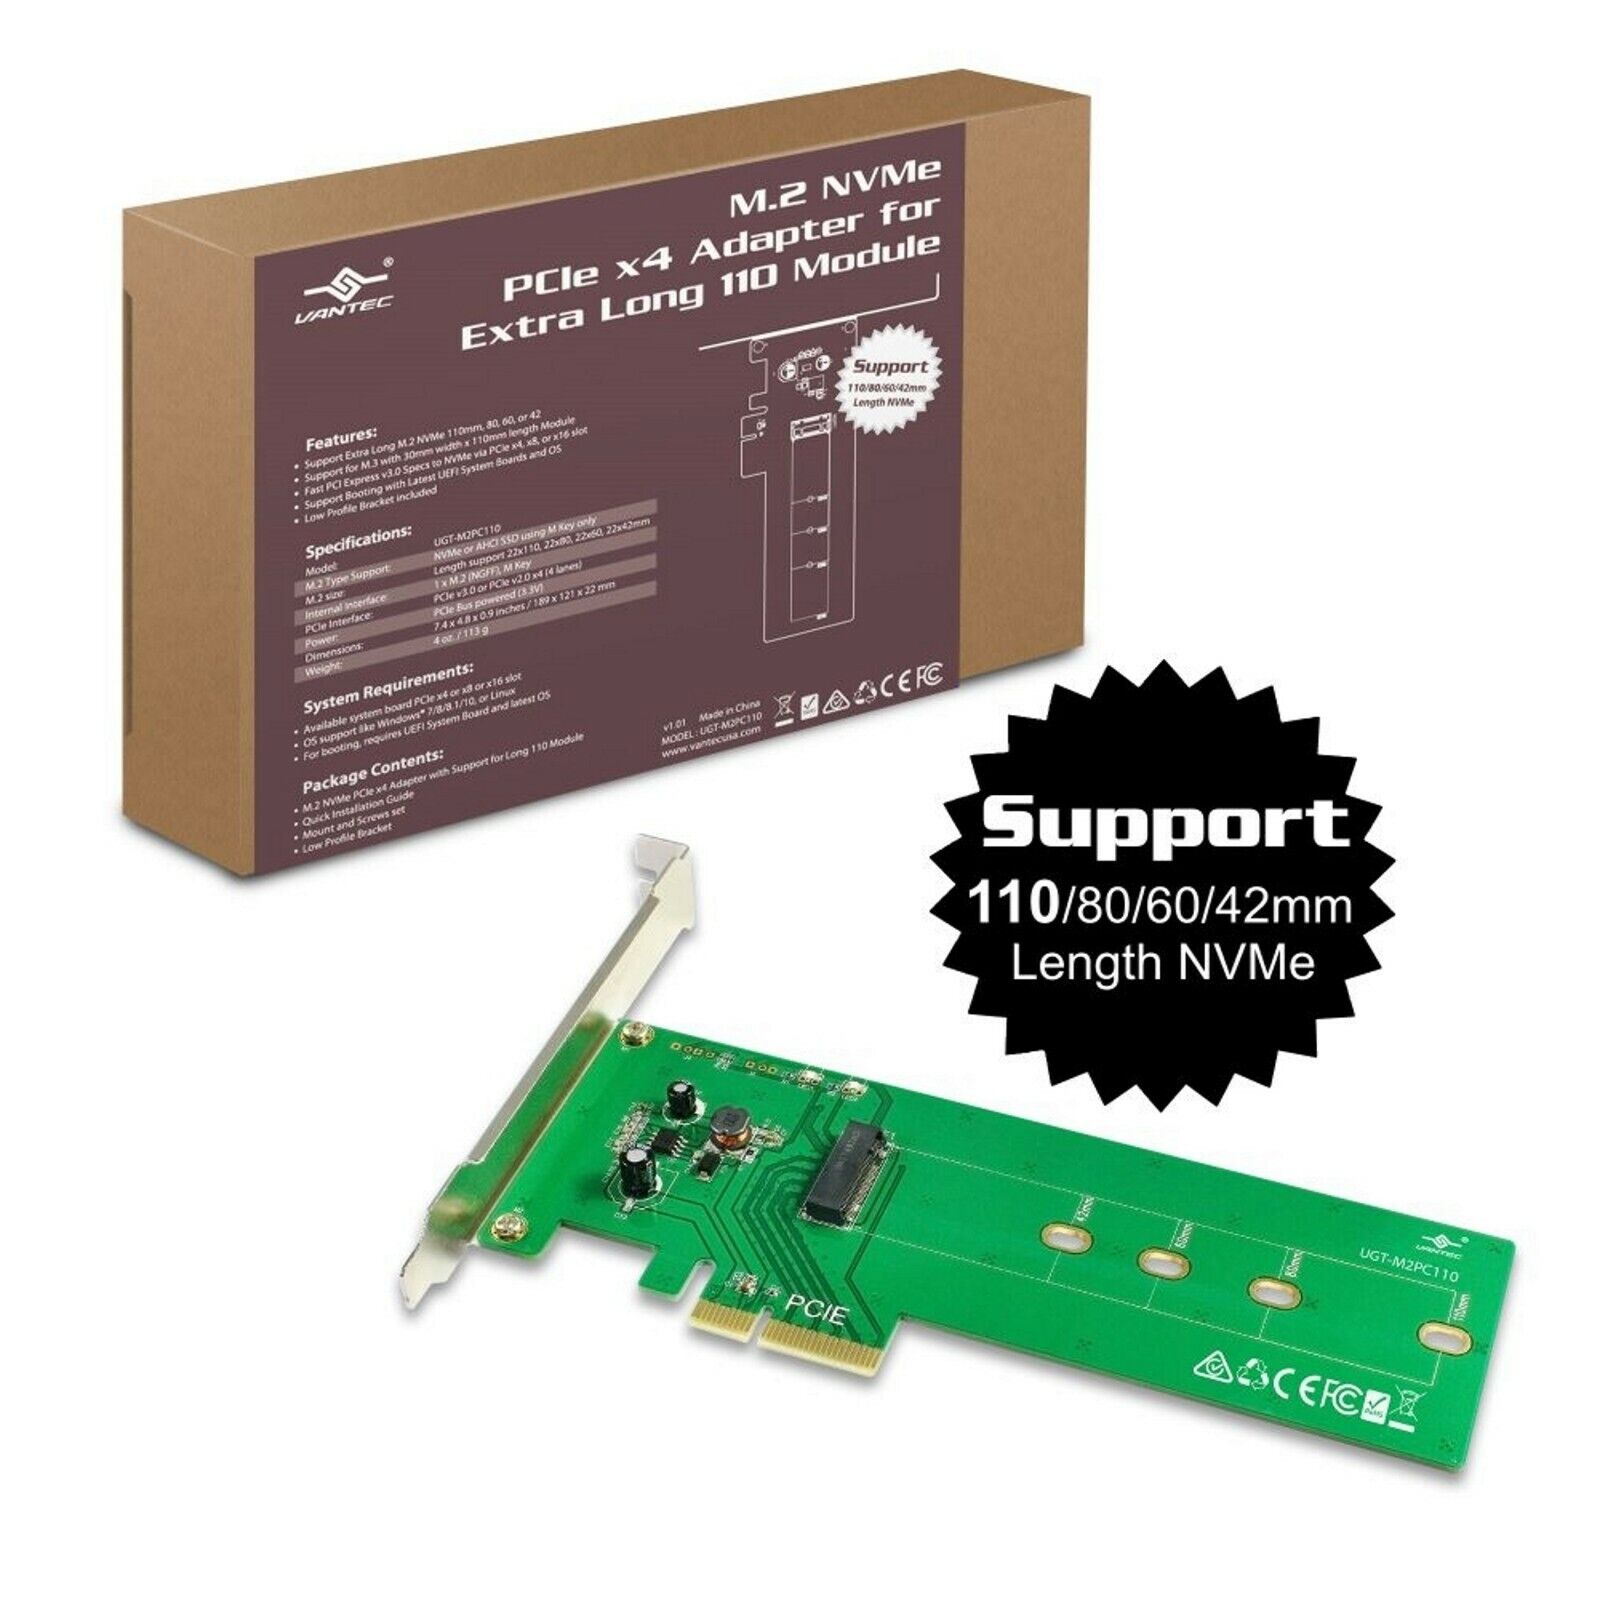 Vantec M.2 NVMe PCIe X4 Adapter For Extra Long 110 Module